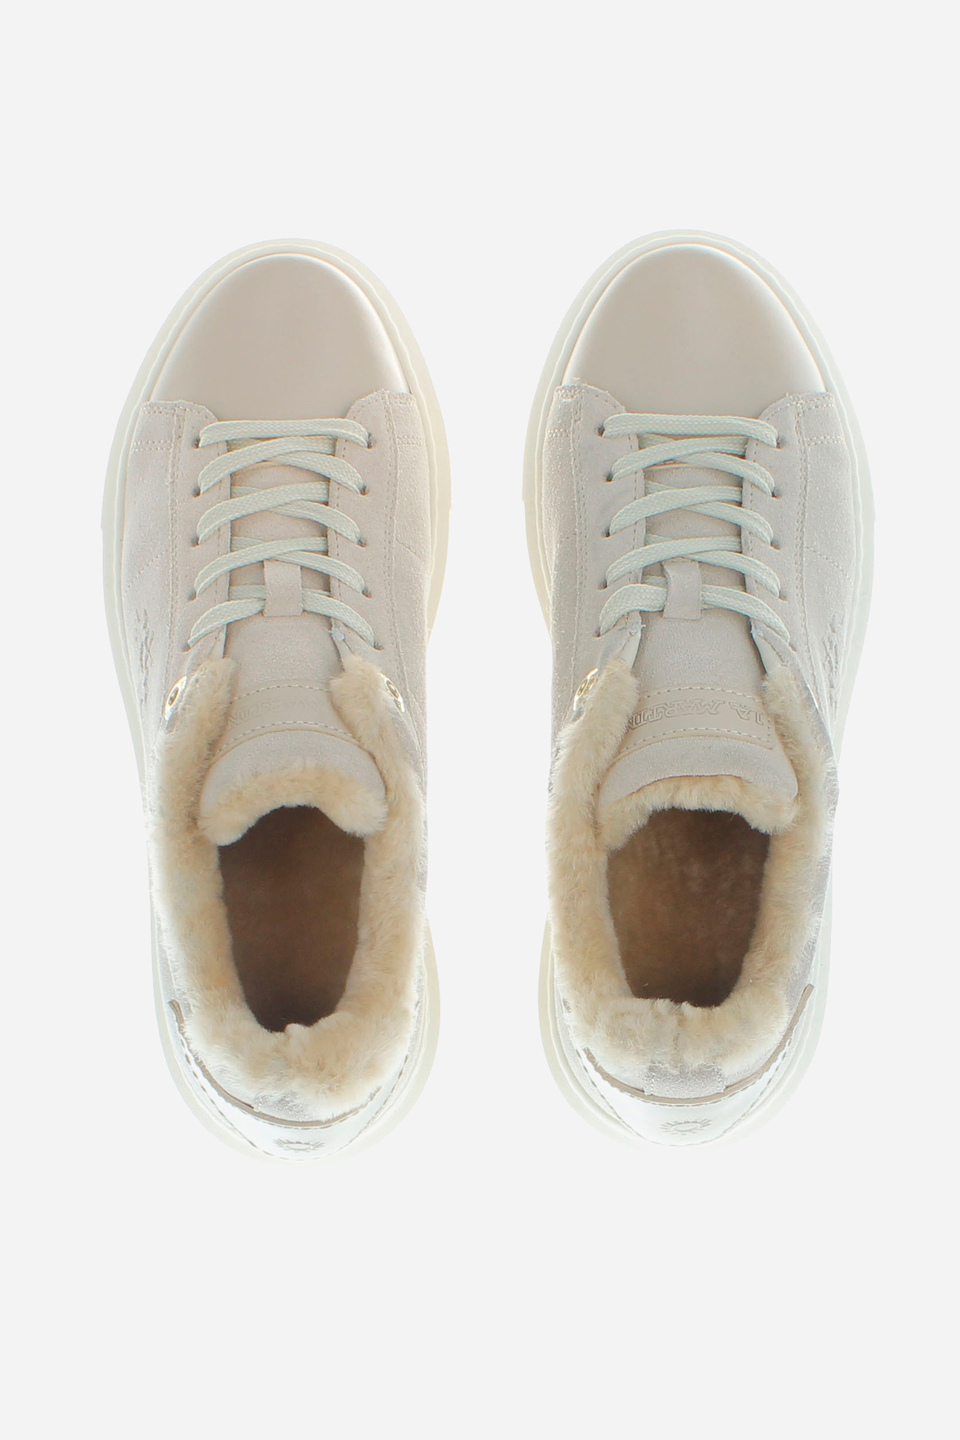 Women’s cupsole trainers in suede | La Martina - Official Online Shop